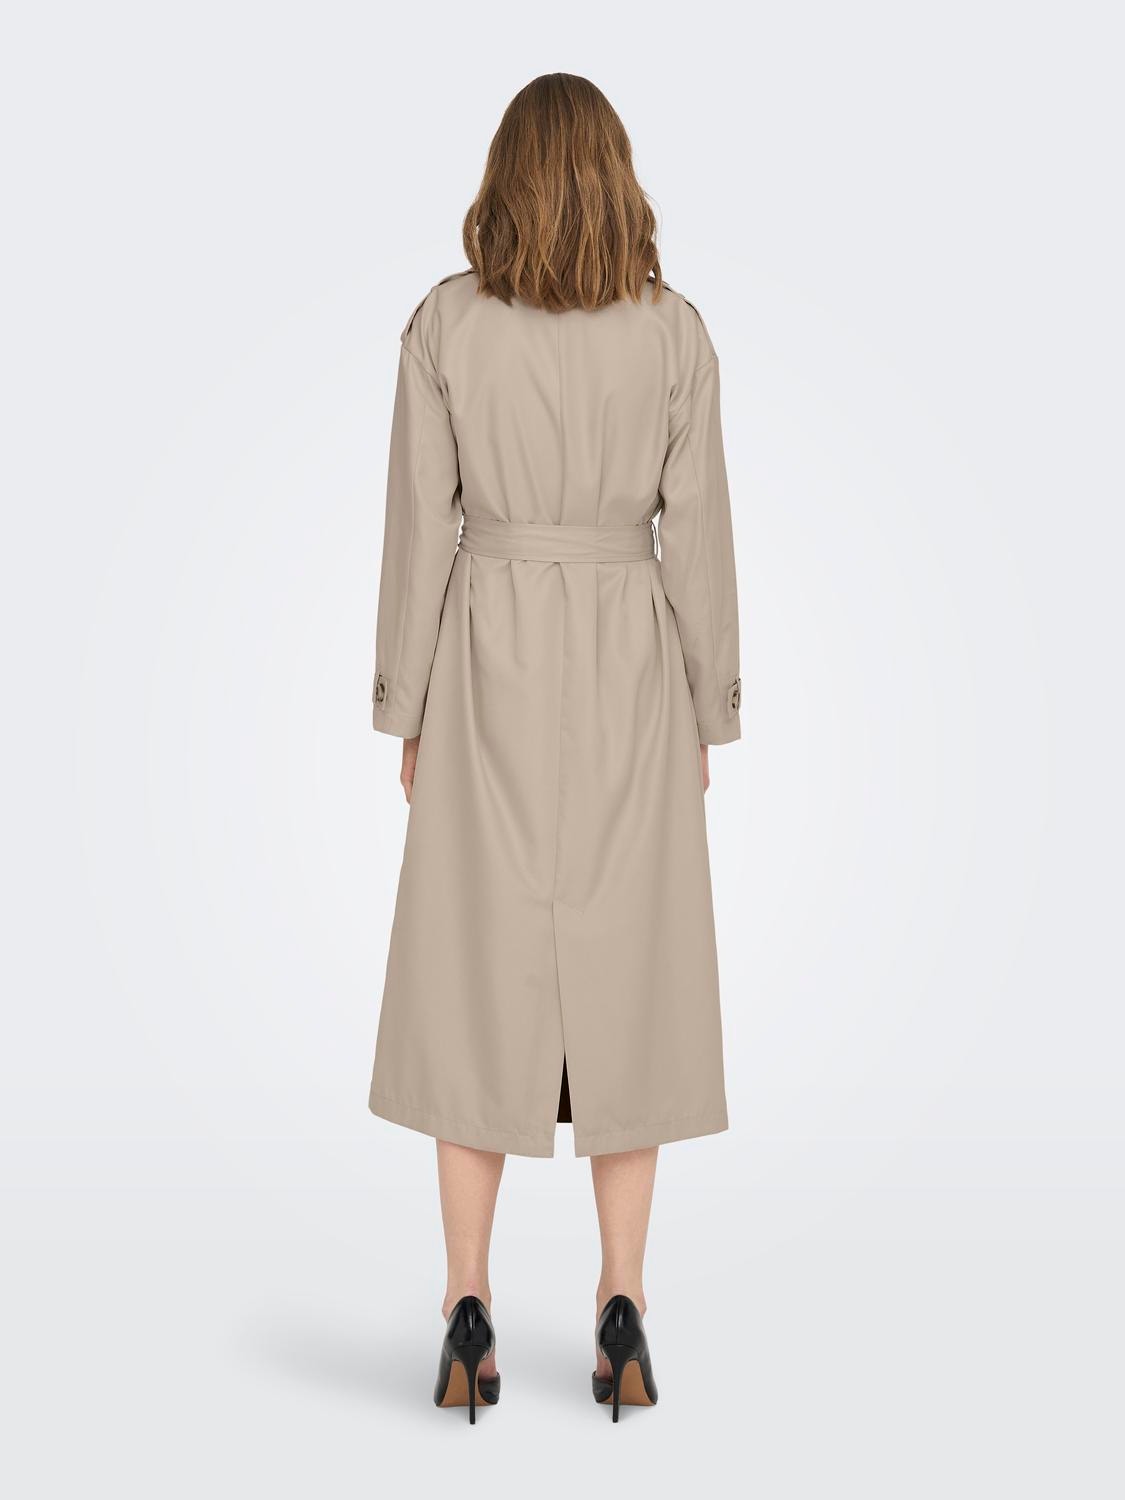 ONLY Trench-coats Col à revers -Humus - 15217799